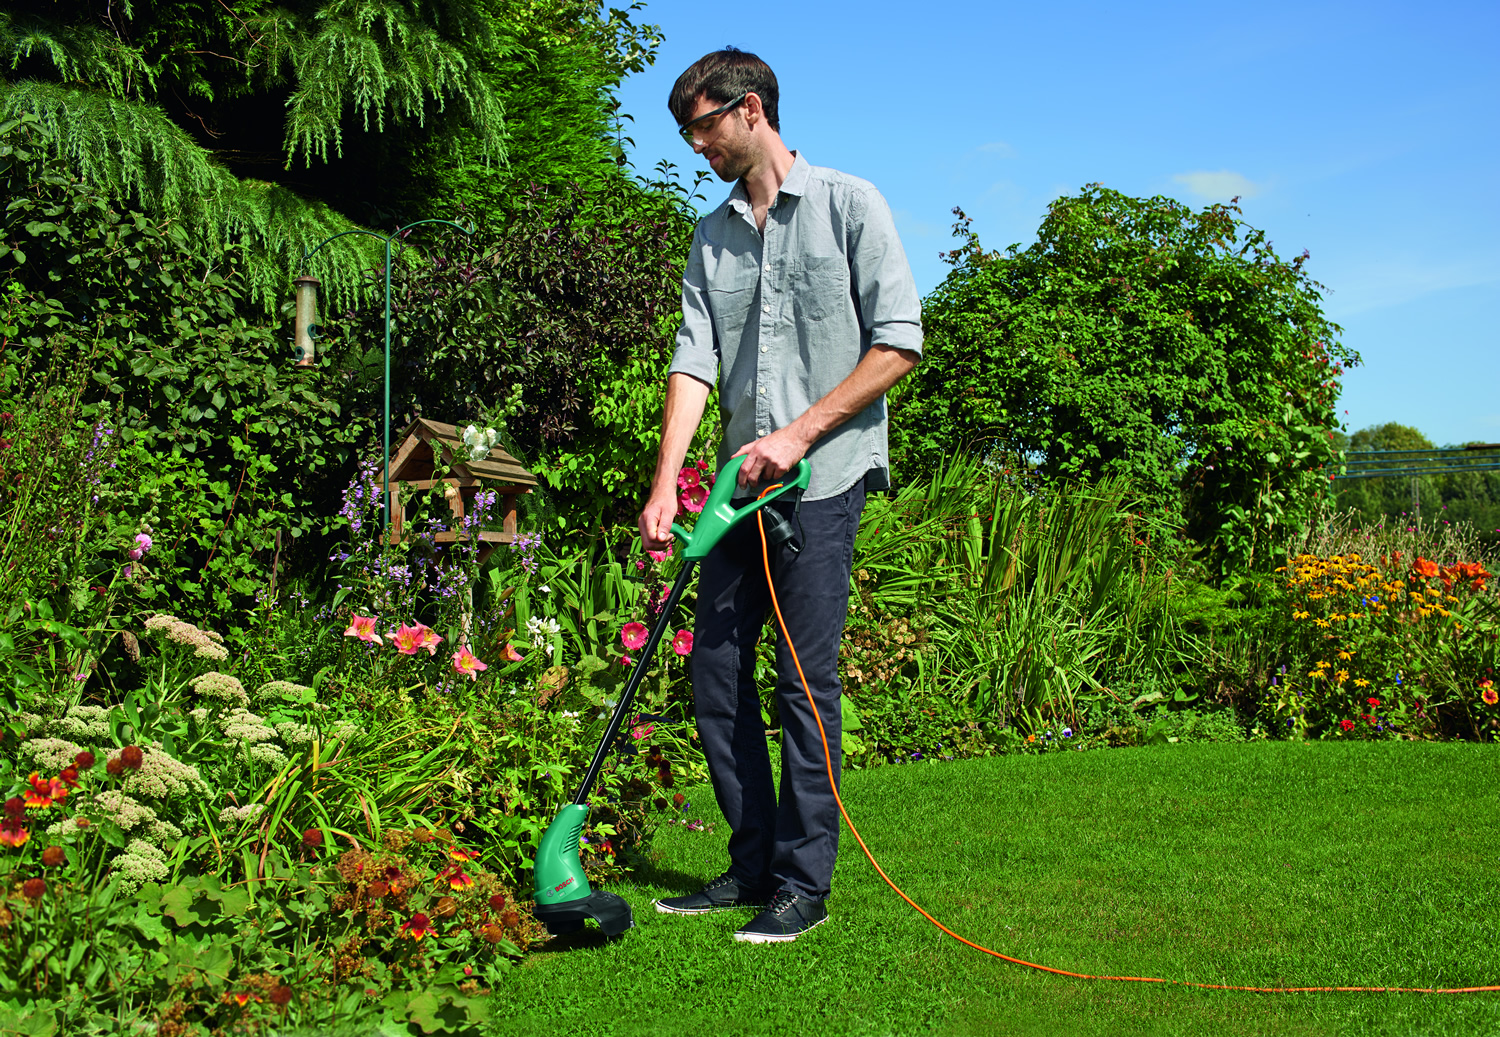 Extra image of Bosch ART 26 SL Electric Grass Trimmer